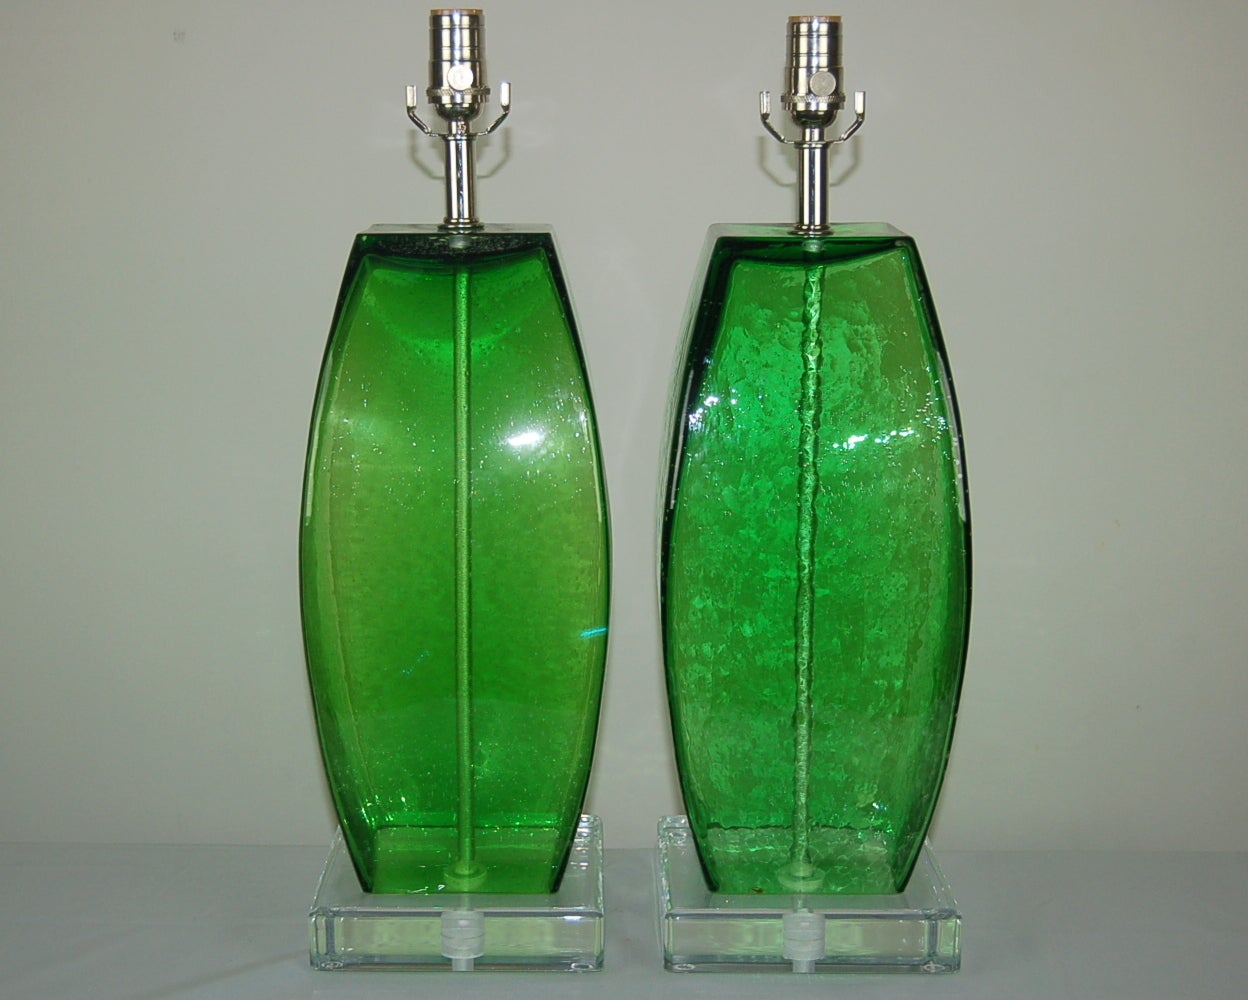 Pulegoso art glass lamps in GRASS GREEN.  They have loads of tiny air bubbles within and were hand blownin the 1970's.  

They stand 22 inches from tabletop to socket top. As shown, the top of shade is 28 inches tall. Lampshades are for display only